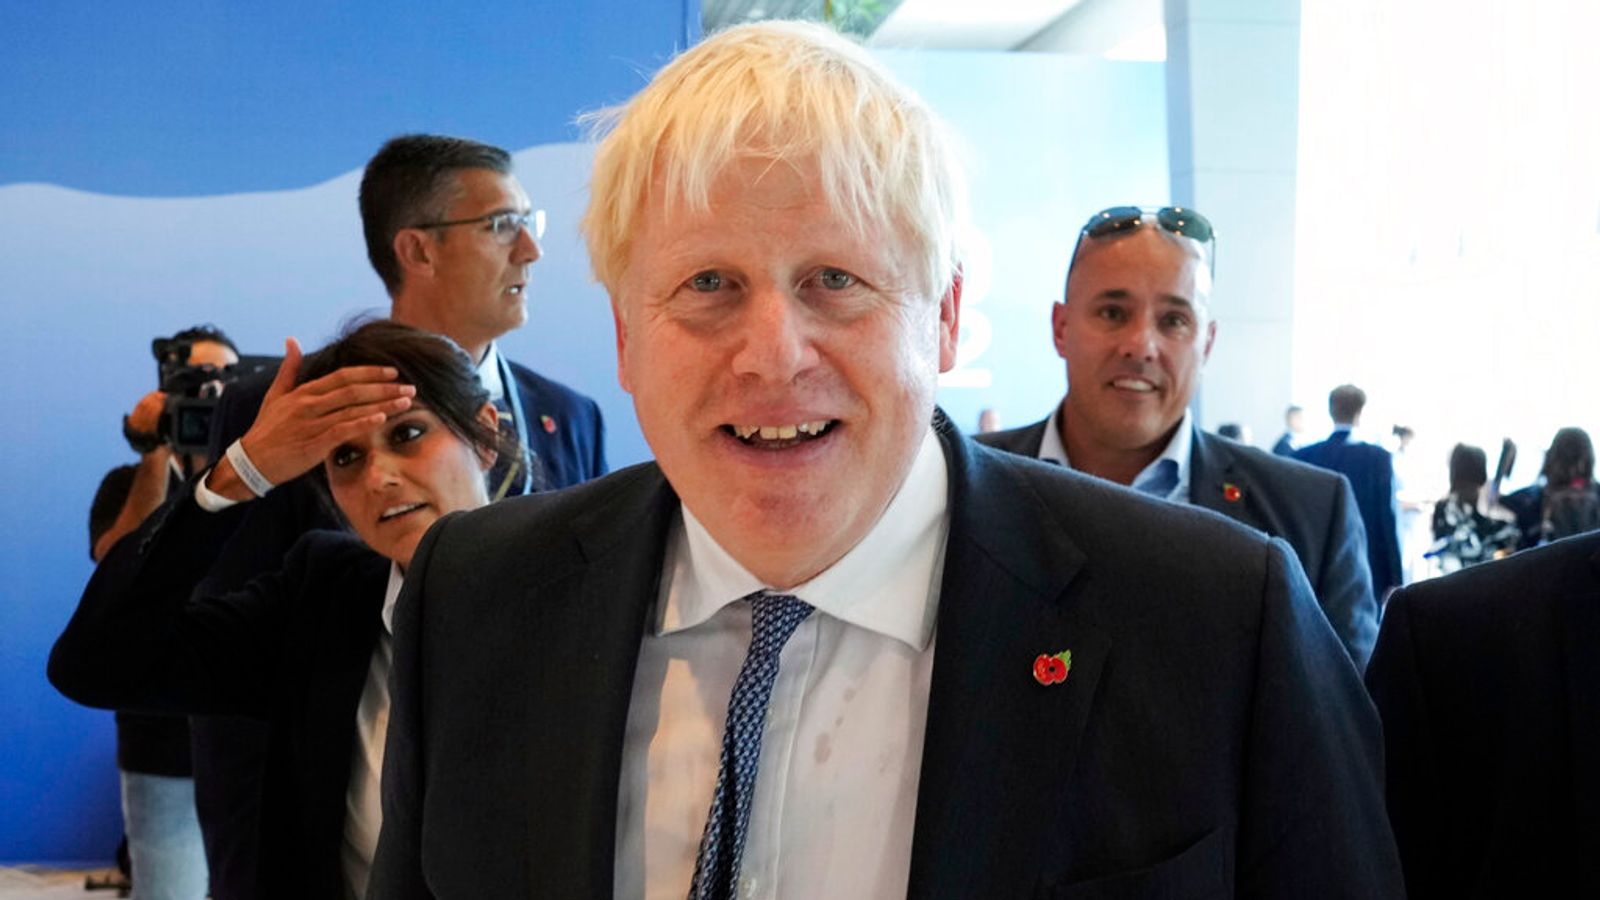 Rishi Sunak says Boris Johnson intends to stand in current Uxbridge seat amid speculation pair could strike deal to avoid leadership challenge